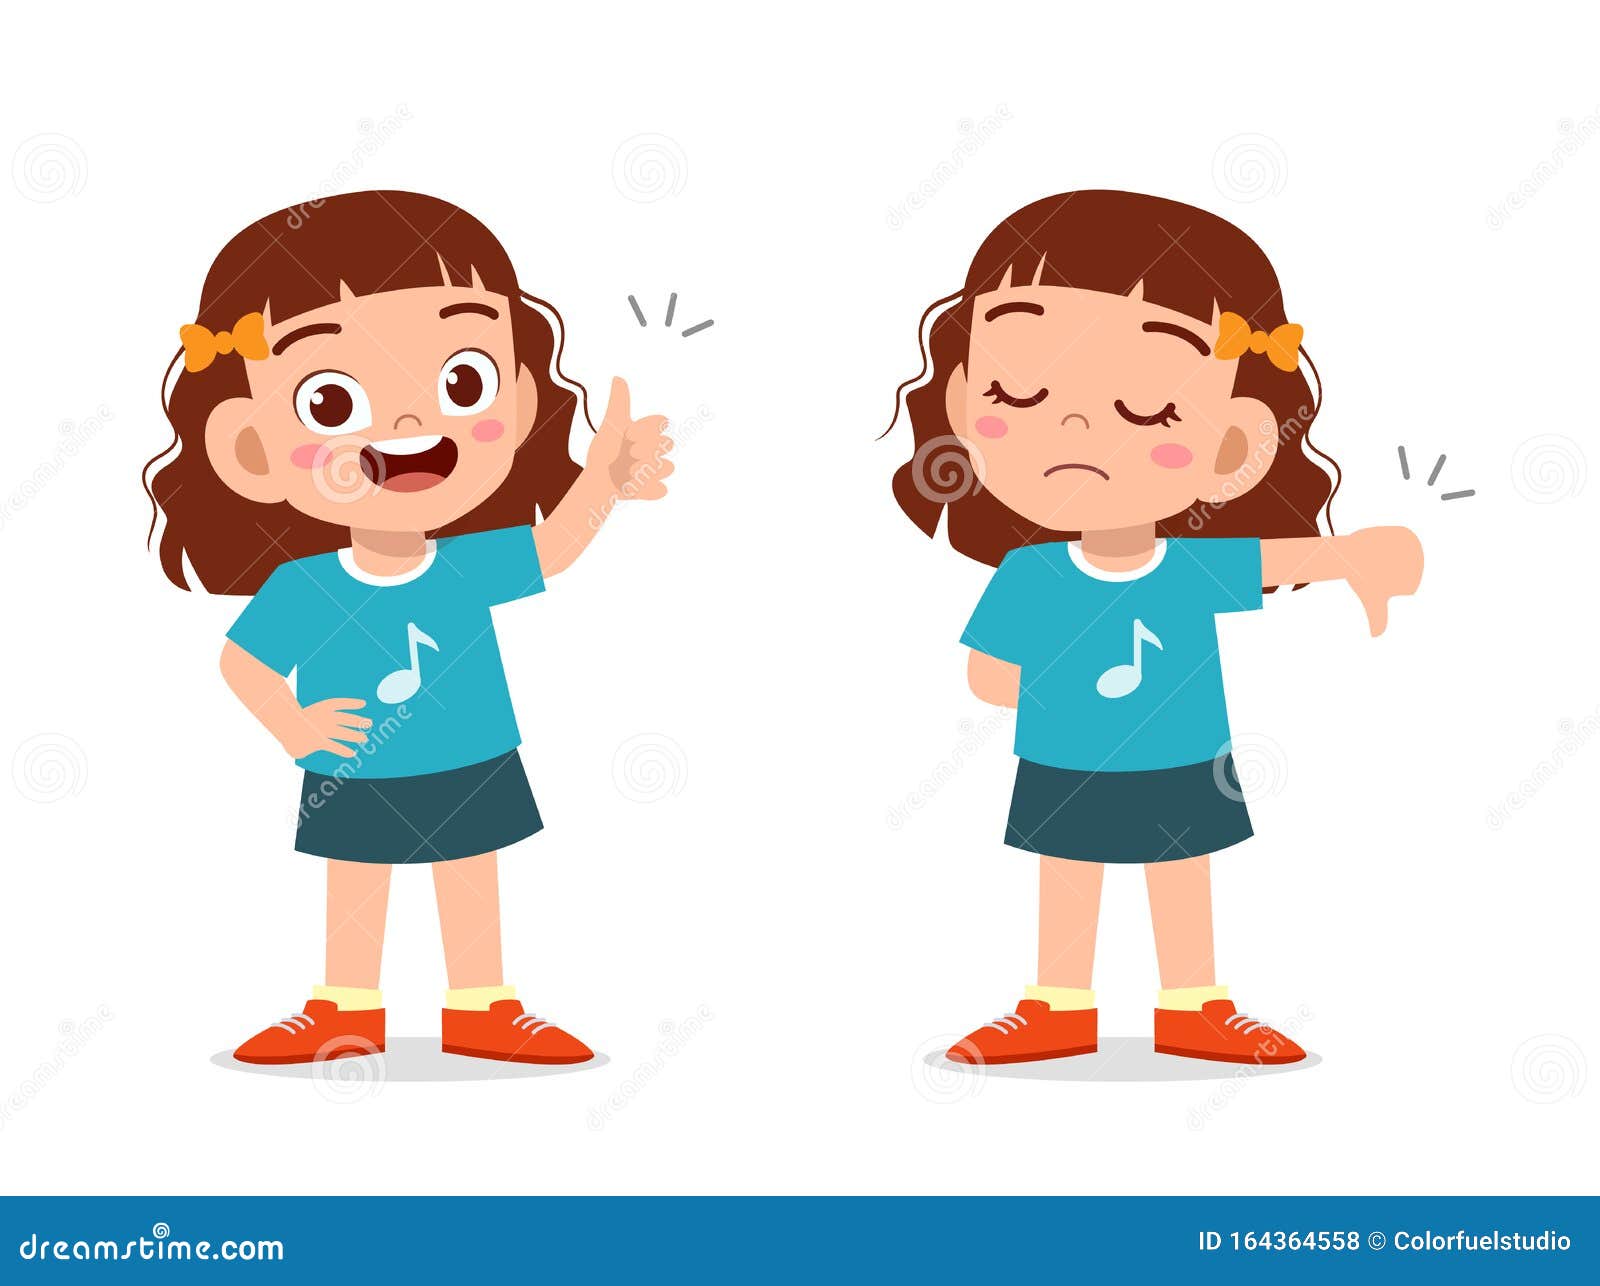 Child Up Down Stock Illustrations 424 Child Up Down Stock Illustrations Vectors Clipart Dreamstime